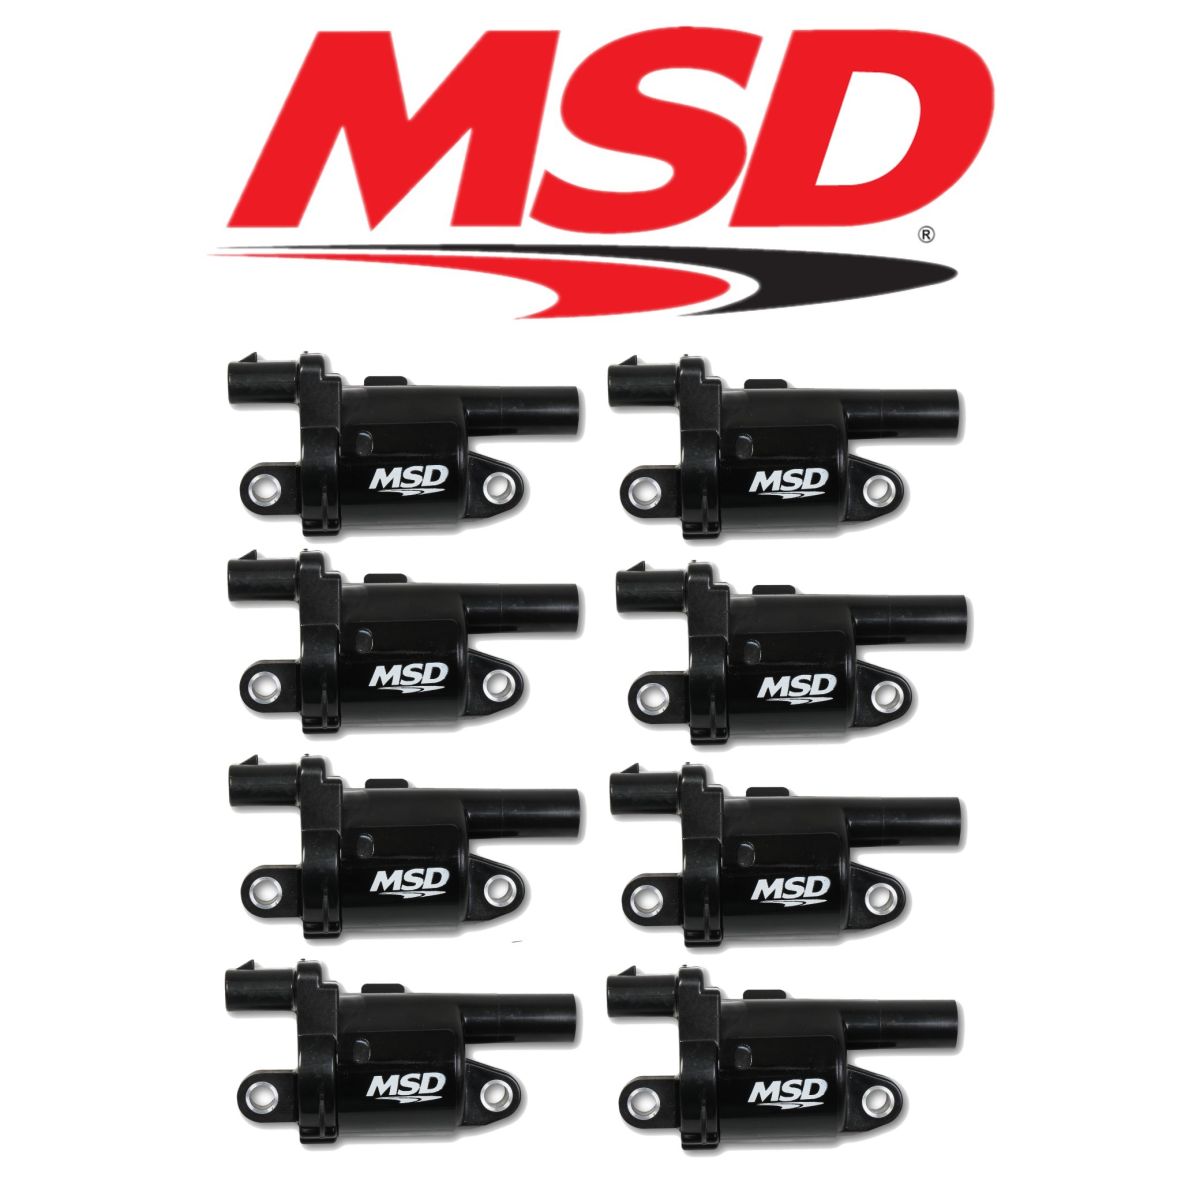 MSD Ignition - MSD Black Blaster Ignition Coil Set For 2014+ Cadillac/Chevrolet/GMC 5.3L/6.2L